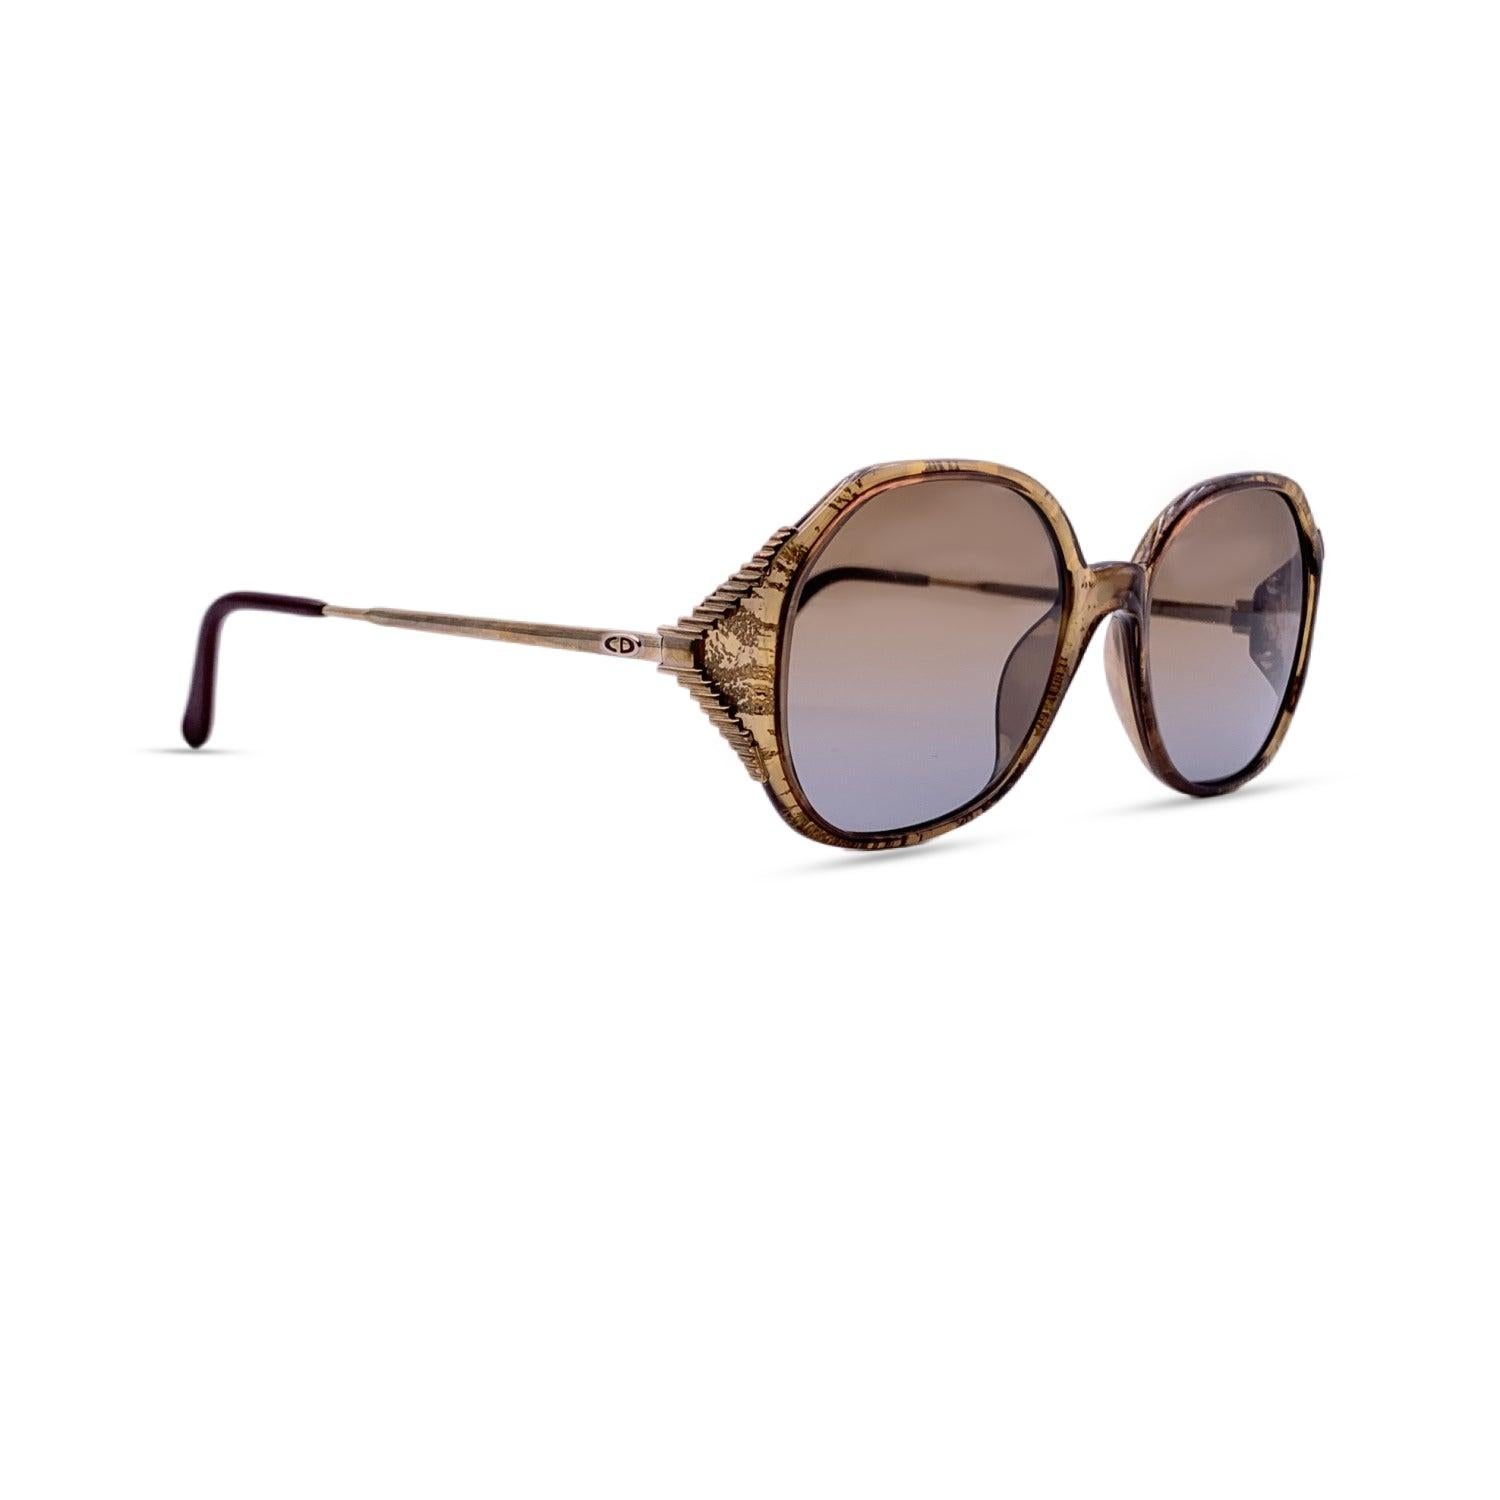 Christian Dior Vintage Glitter Sunglasses 2527 31 Optyl 56/18 130mm In Excellent Condition For Sale In Rome, Rome